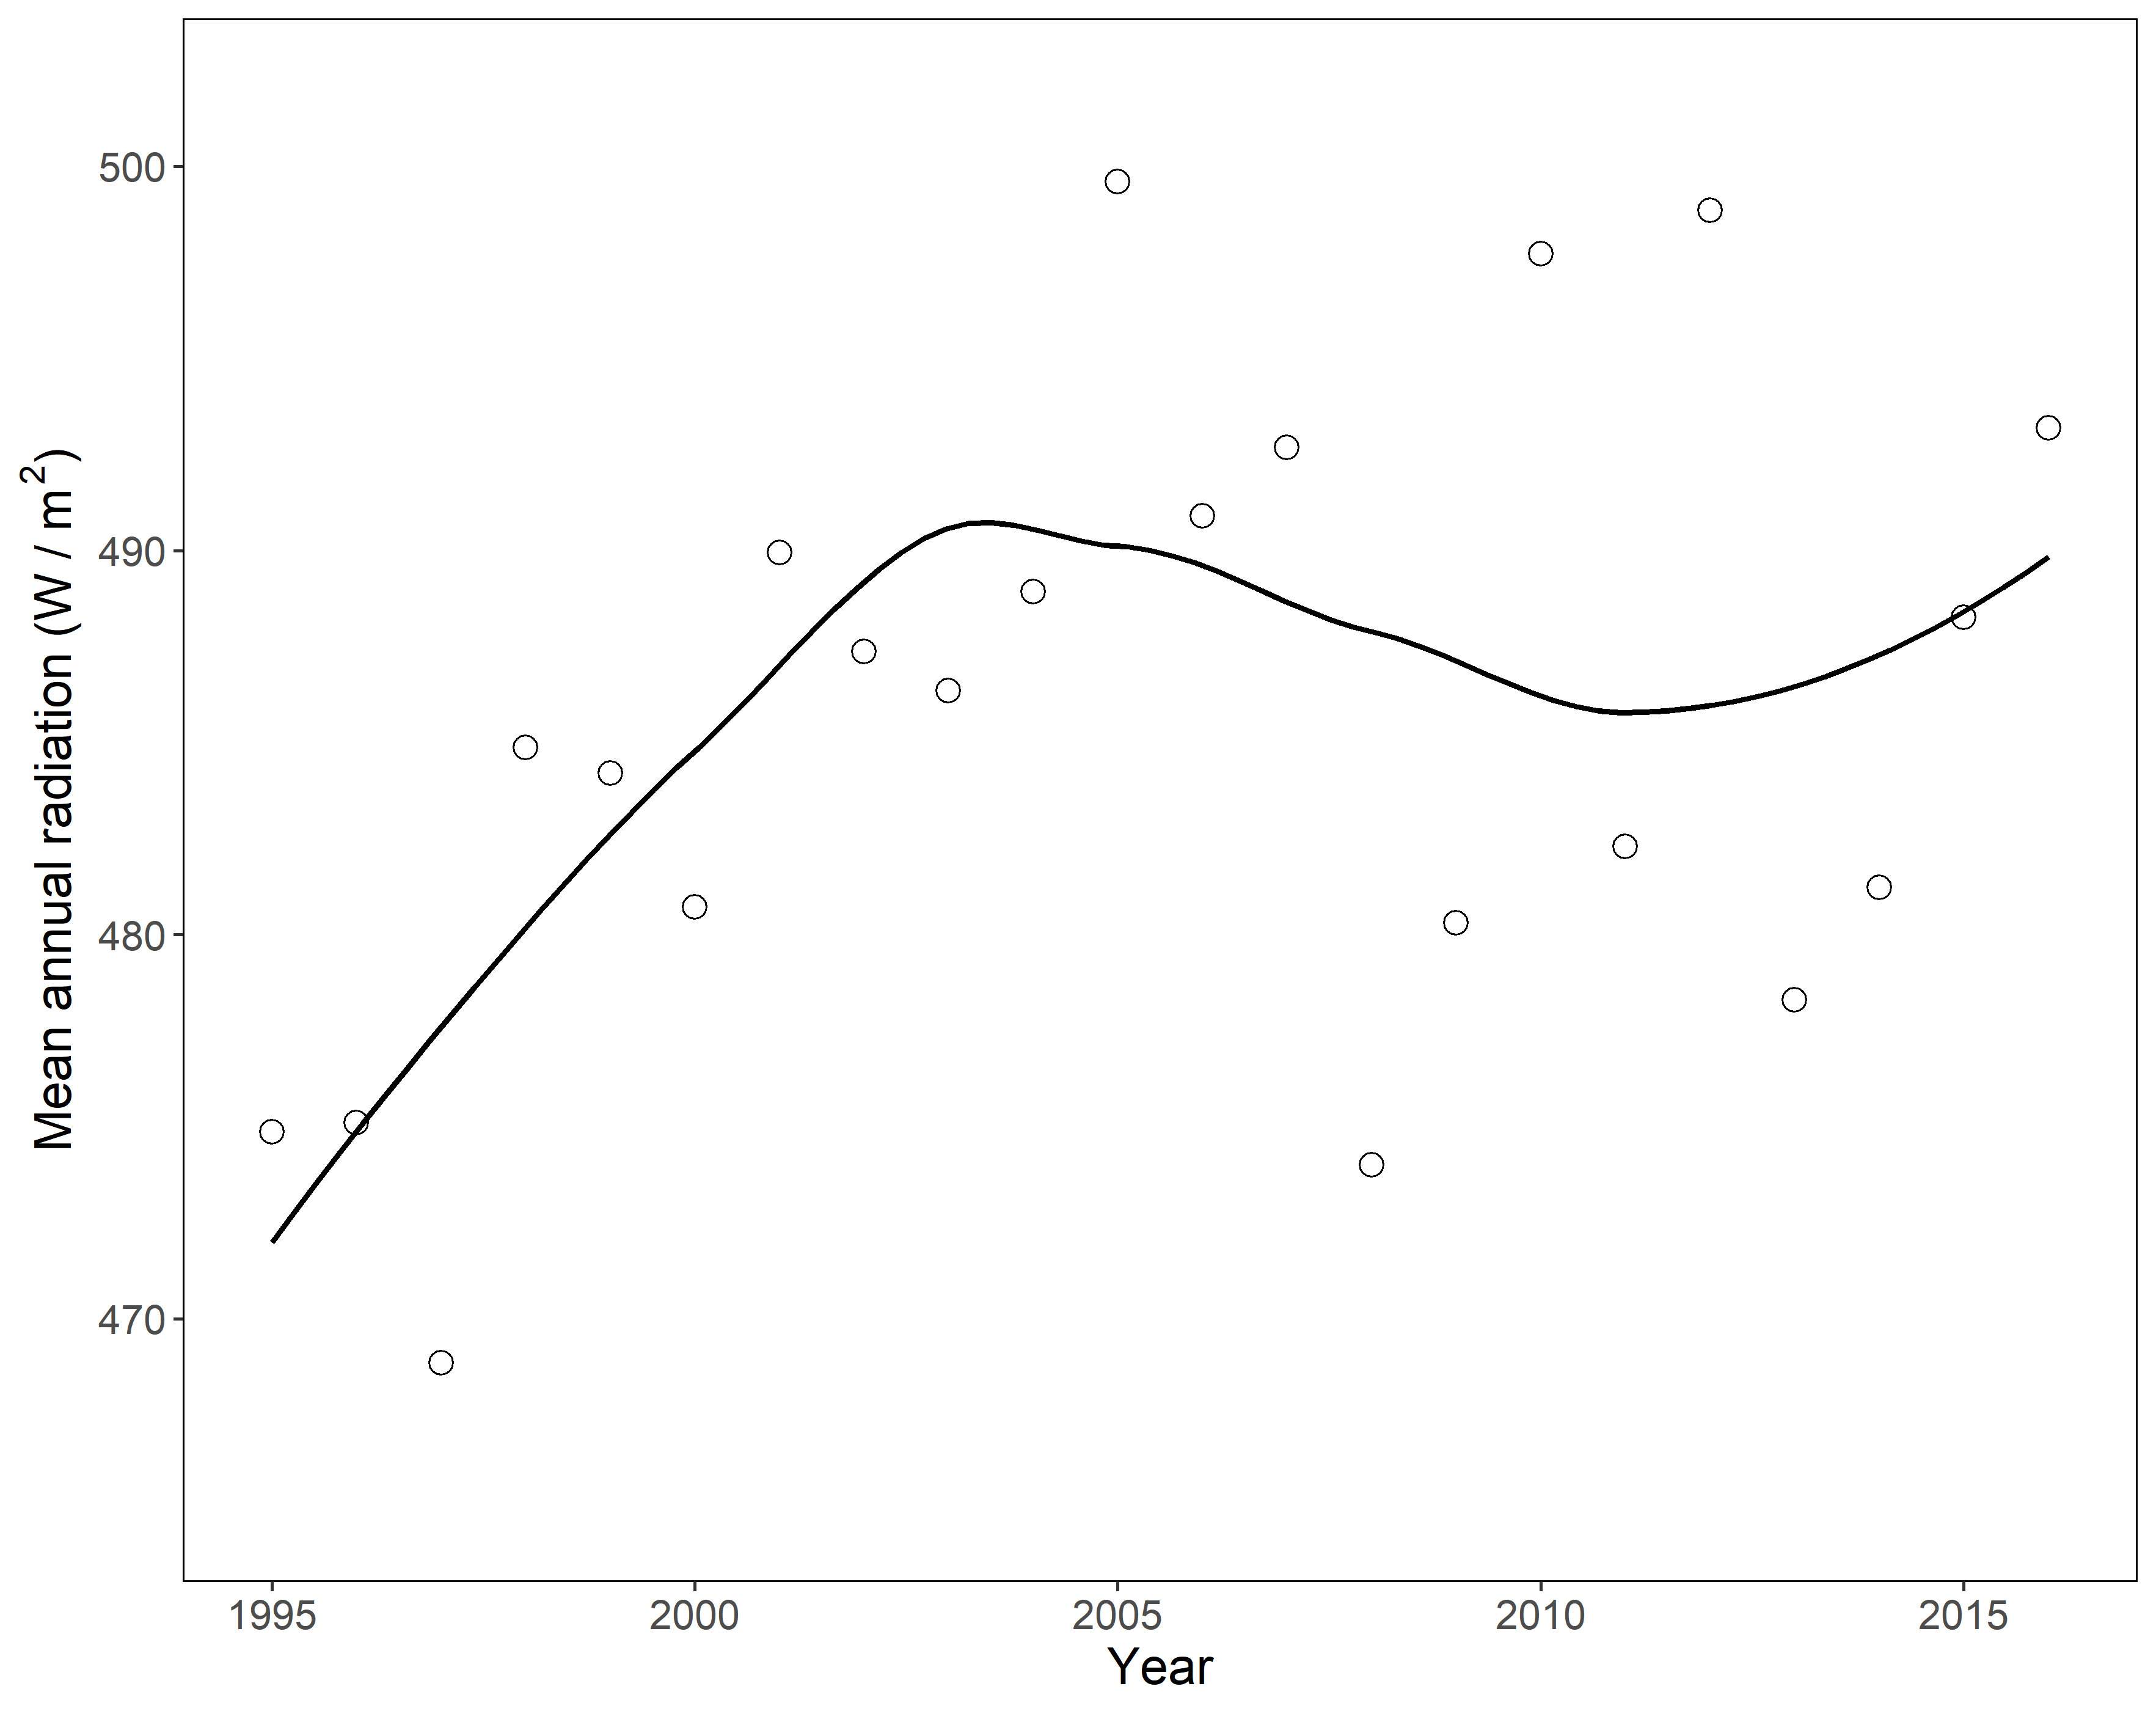 The yearly averages of solar radiation in Bondeville, IL, with a loess smoothing trendline to aid in visualization.